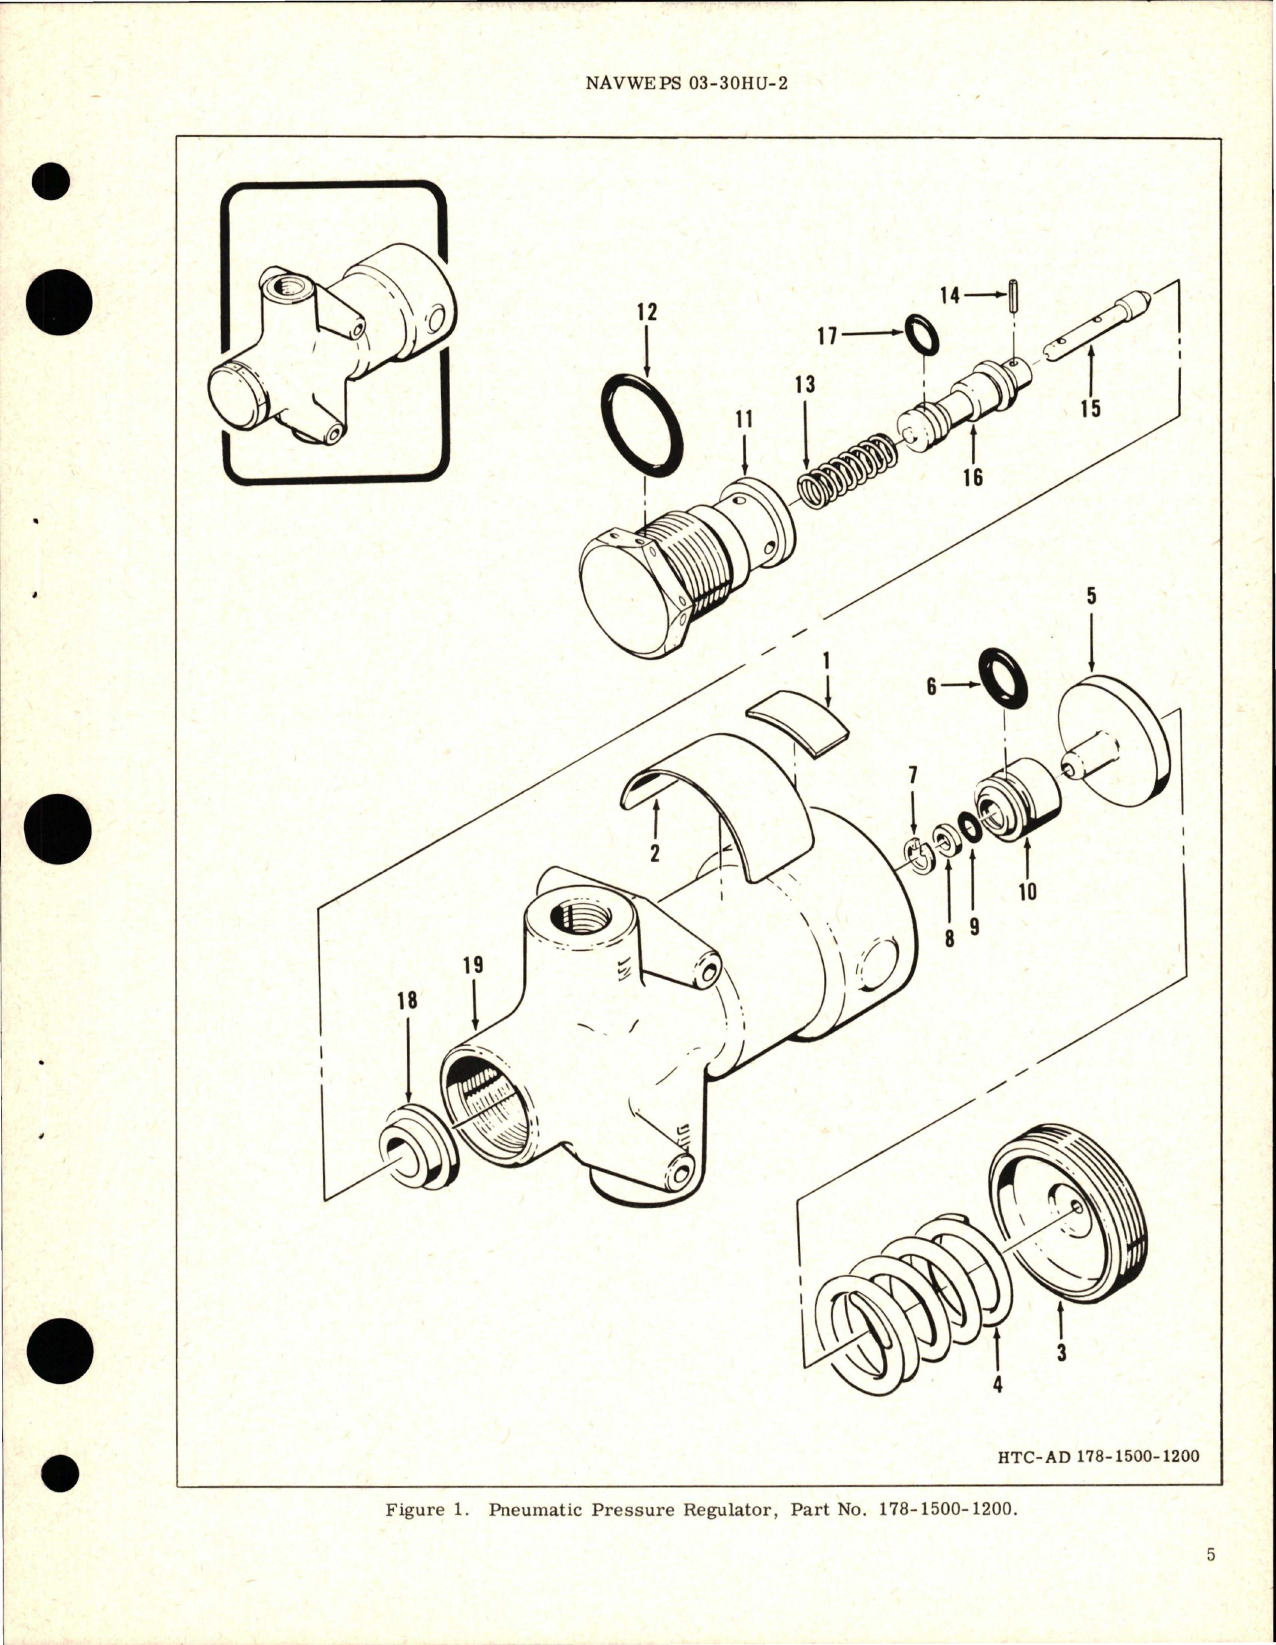 Sample page 5 from AirCorps Library document: Overhaul Instructions with Parts Breakdown for Pneumatic Pressure Regulator Assembly - Part 178-1500-1200